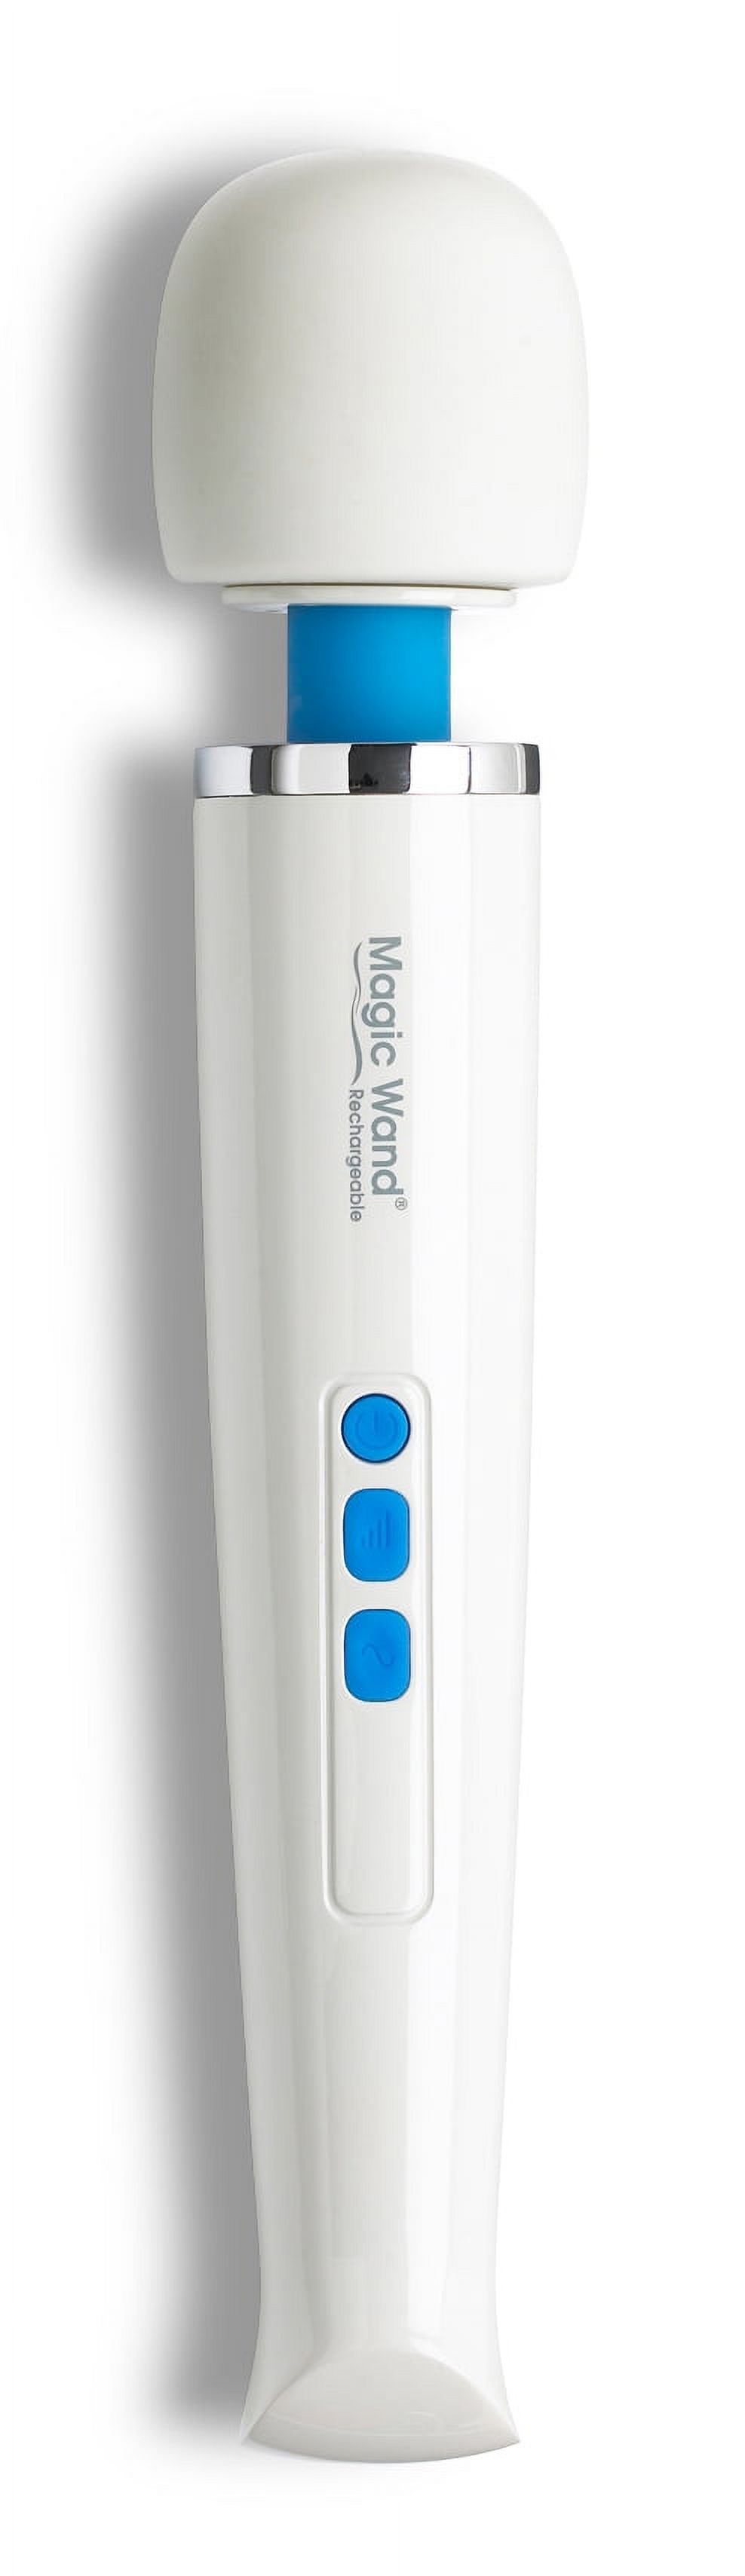 Magic Wand HV 270 Rechargable Personal Massager - image 1 of 7